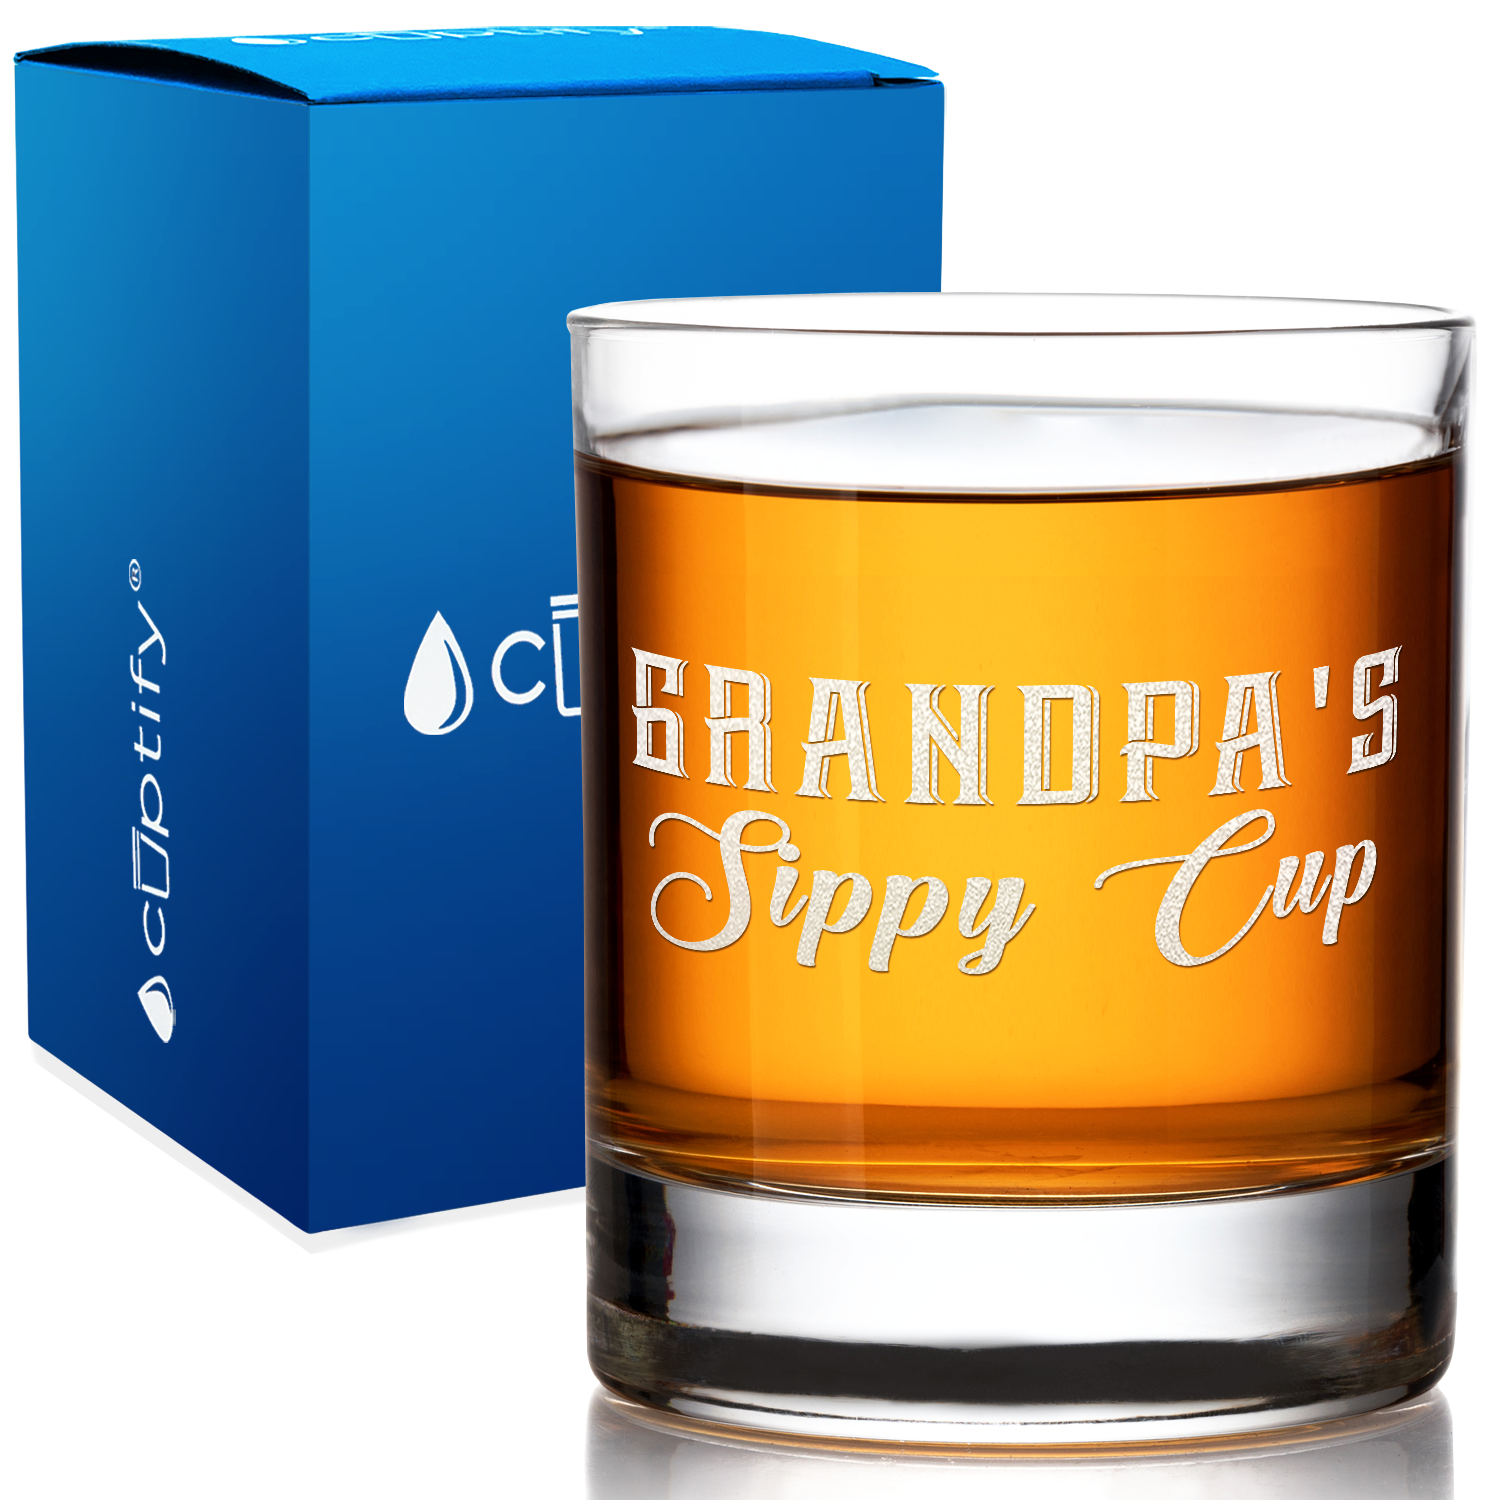 Grandpa's Sippy Cup on 10.25oz Old Fashioned Glass